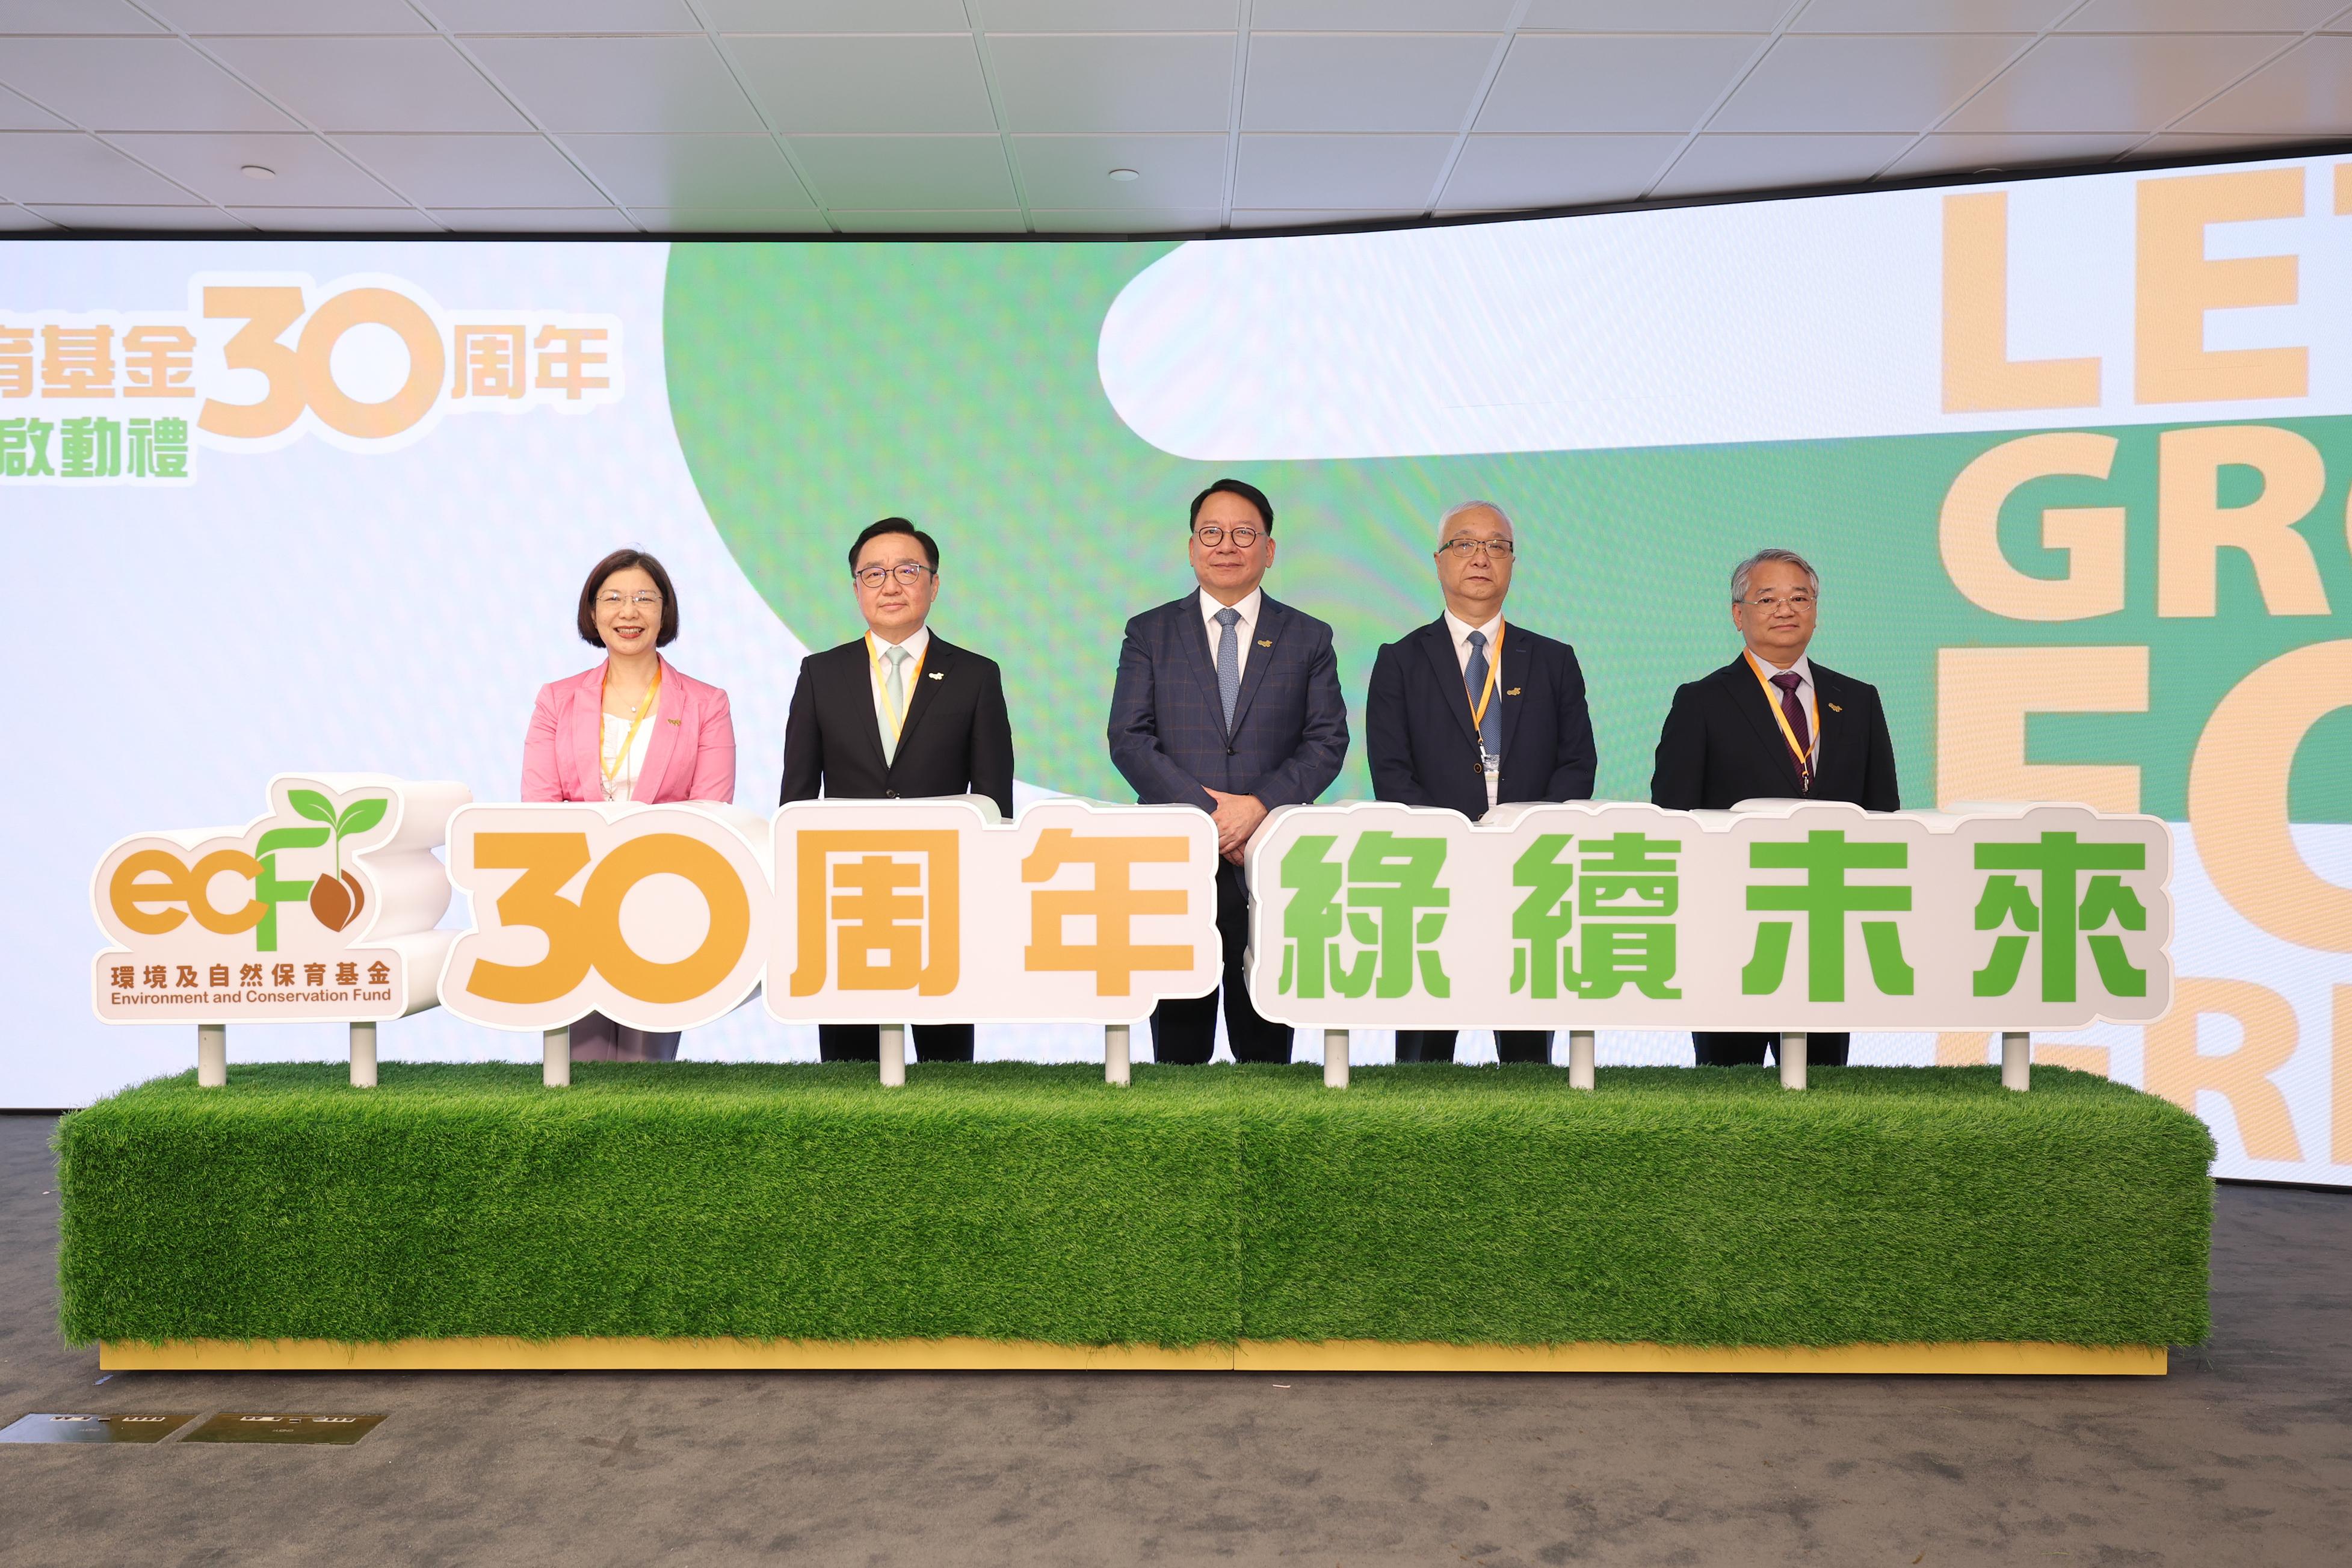 The Environment and Conservation Fund (ECF) 30th anniversary "Let’s Grow for Green" launching ceremony was held at the Hong Kong Productivity Council Building in Kowloon today (June 3). The ceremony was officiated by the Chief Secretary for Administration, Mr Chan Kwok-ki (centre); the Secretary for Environment and Ecology, Mr Tse Chin-wan (second right); the Chairman of the ECF Committee, Dr Eric Cheng (second left); the Permanent Secretary for Environment and Ecology (Environment), Miss Janice Tse (first left); and the Director of Environmental Protection, Dr Samuel Chui (first right).